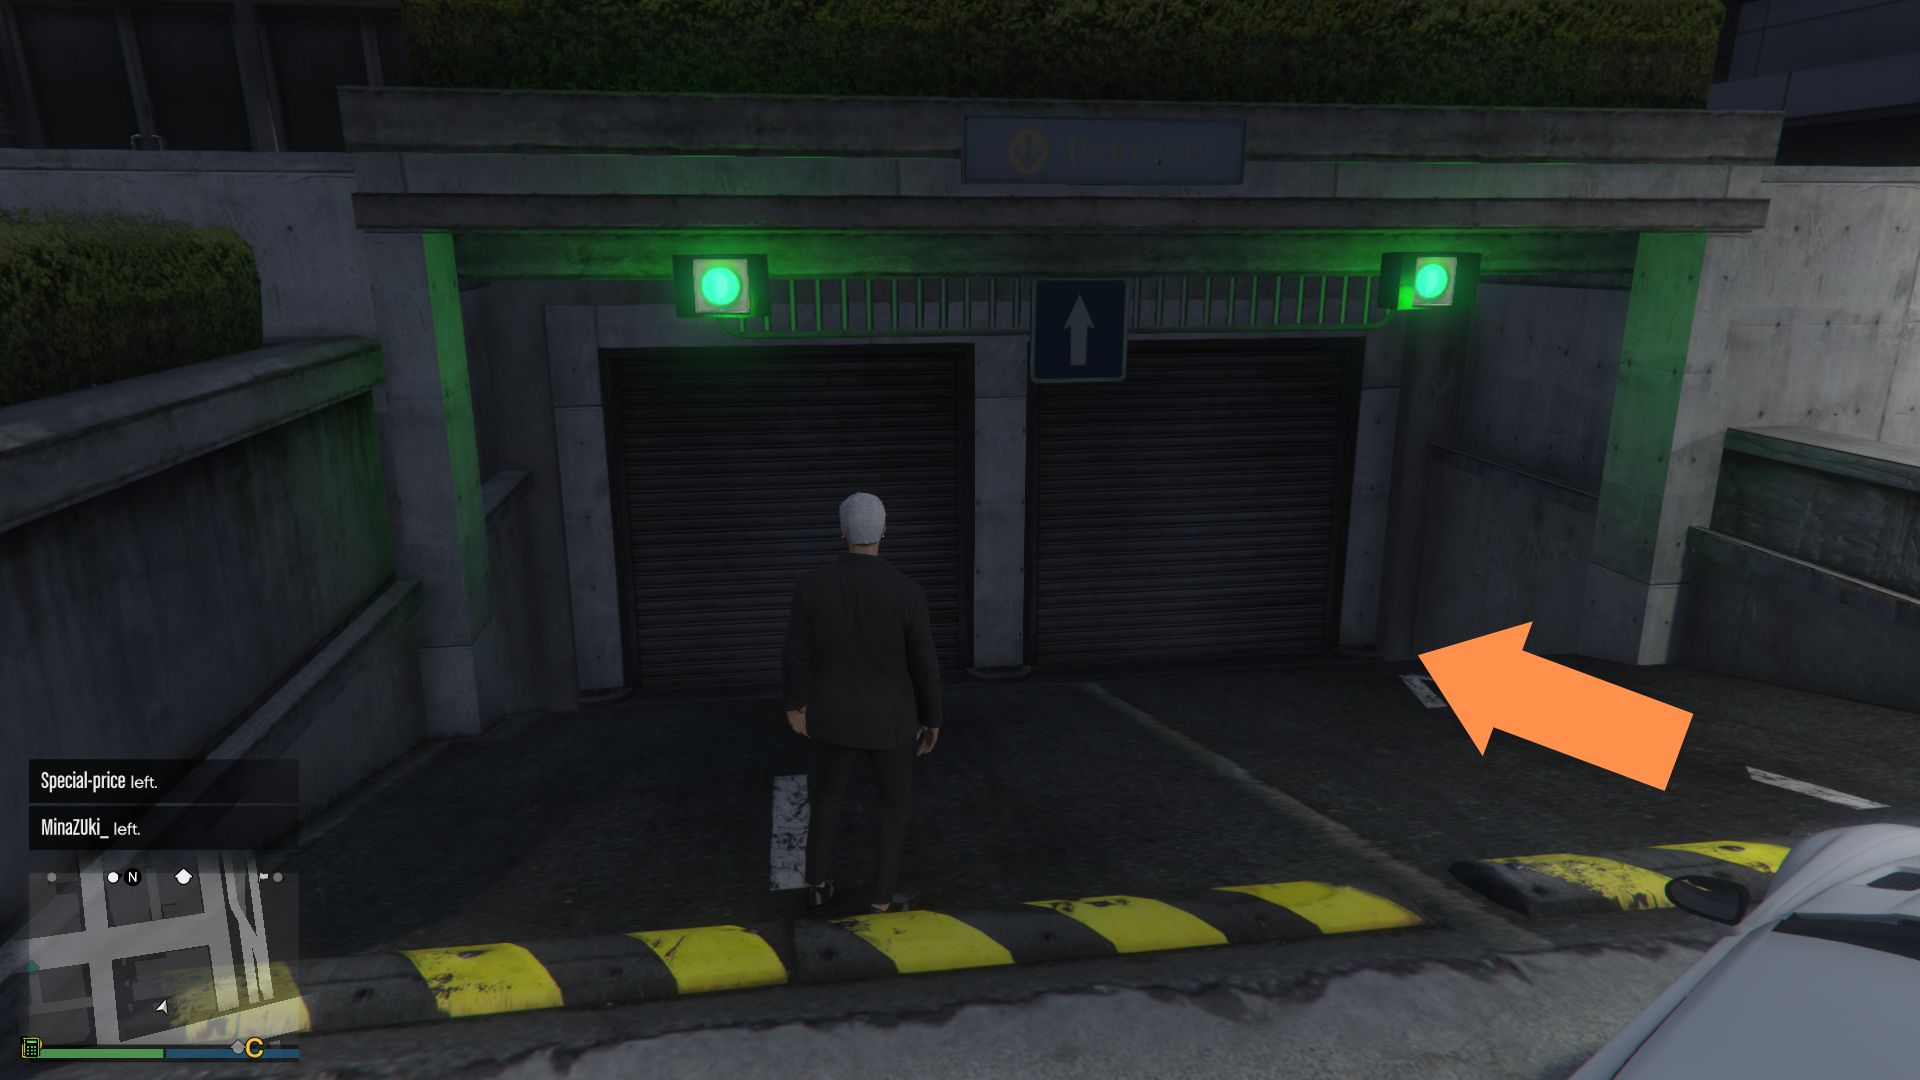 Stand next to the gate and pick a car you want to get back in GTA 5